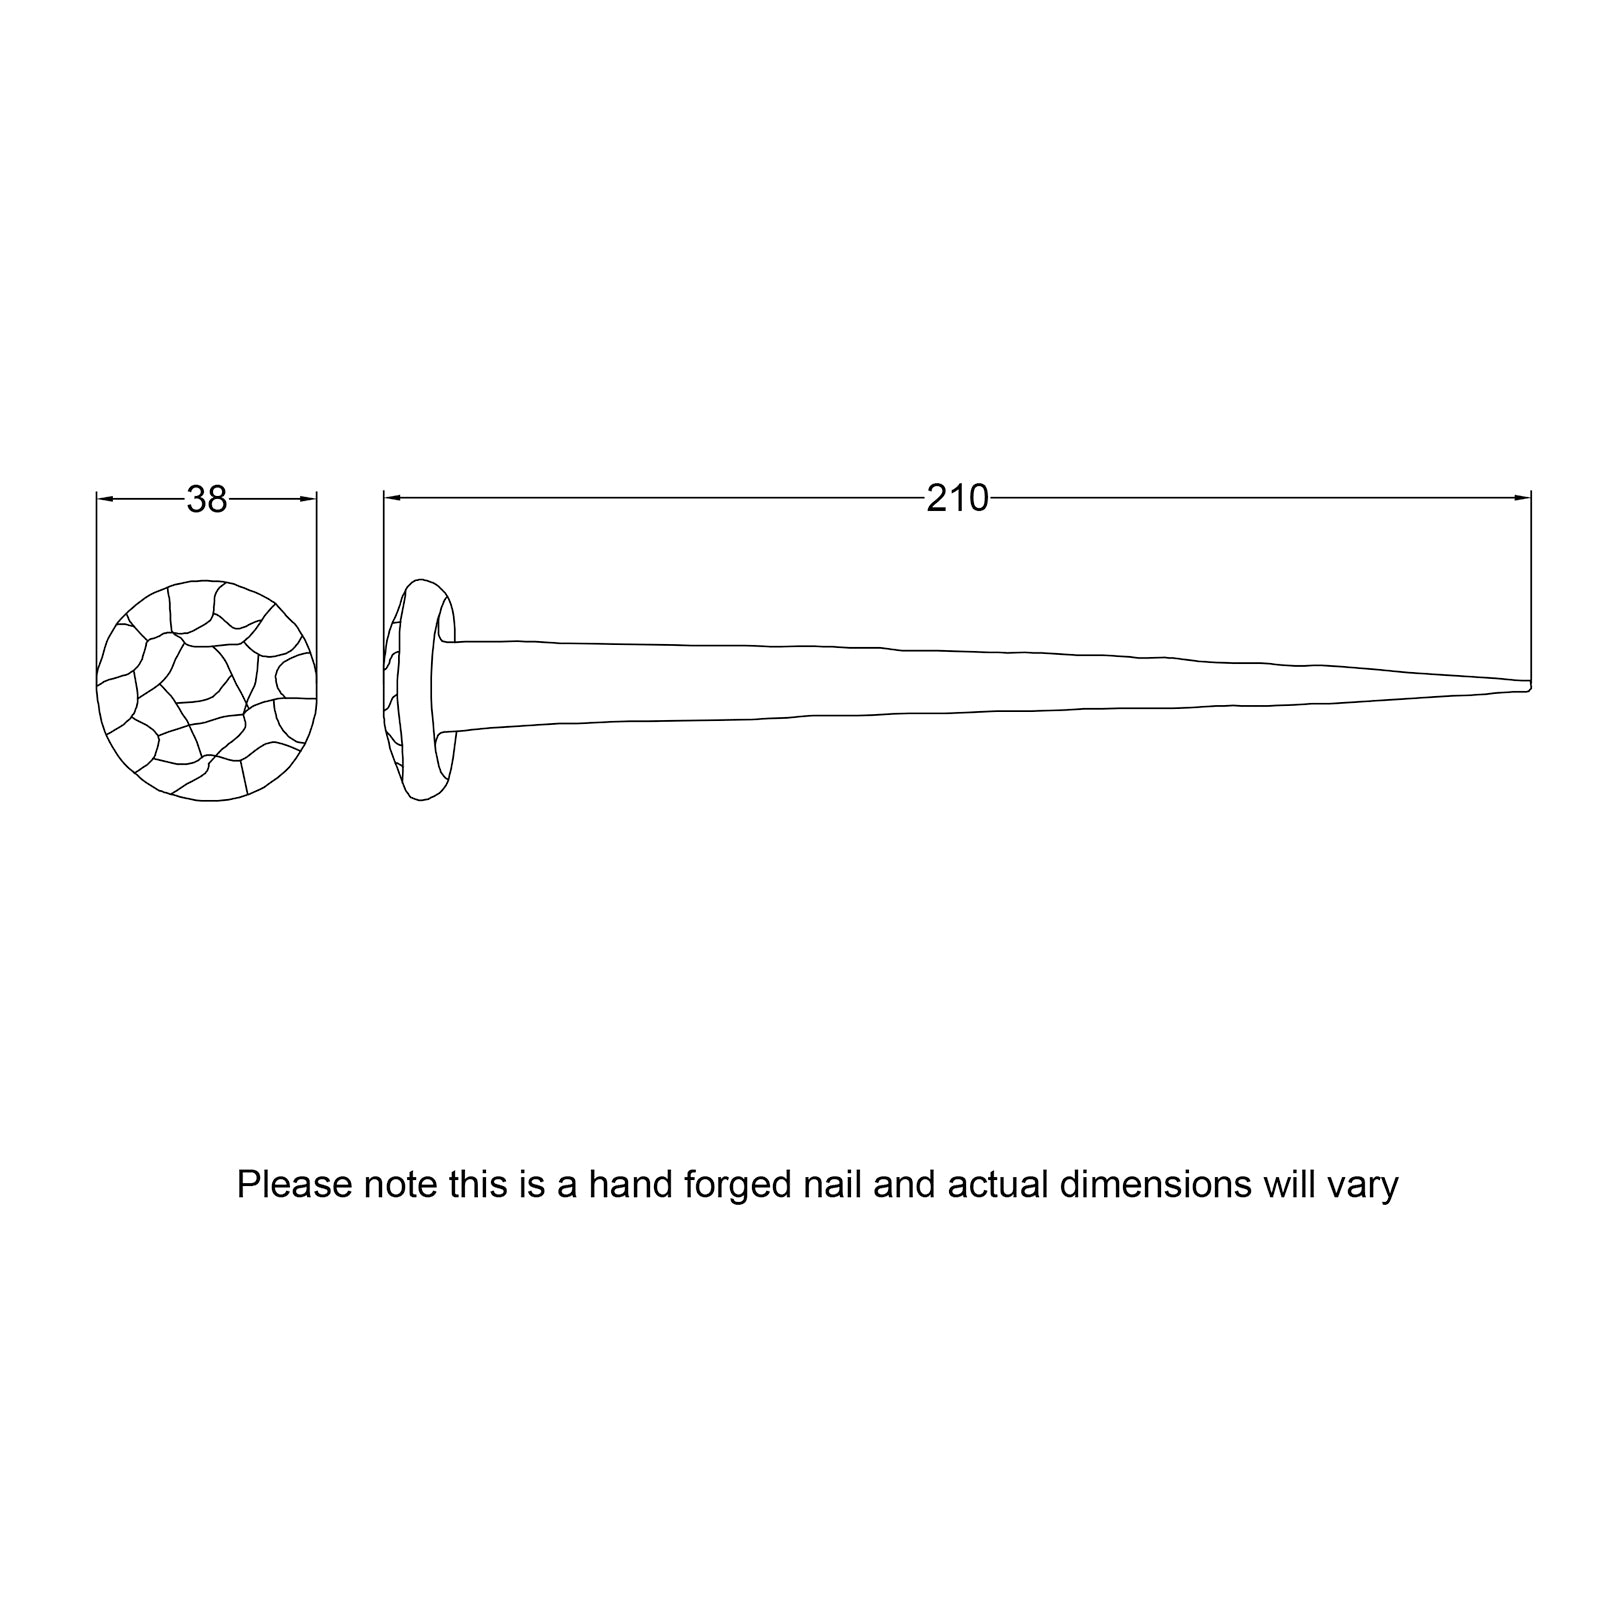 Dimension drawing for hand forged round head nail 200mm SHOW